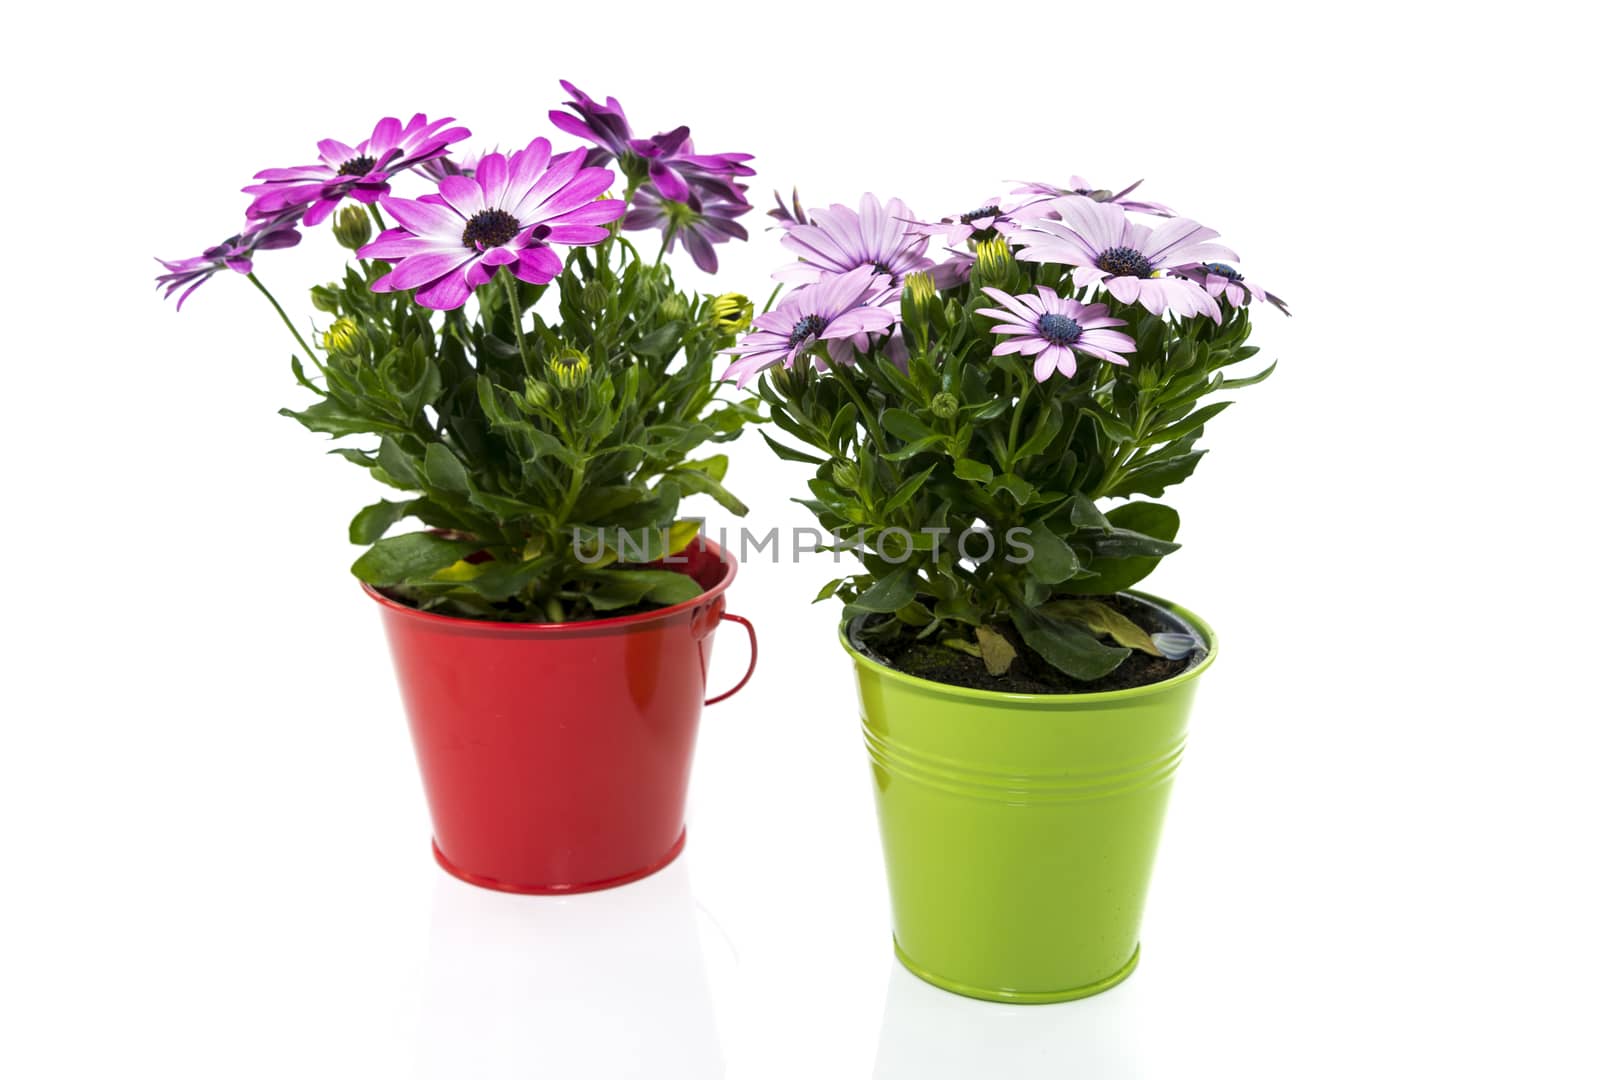 spanish daisy flowers in red and green bucket isolated on white